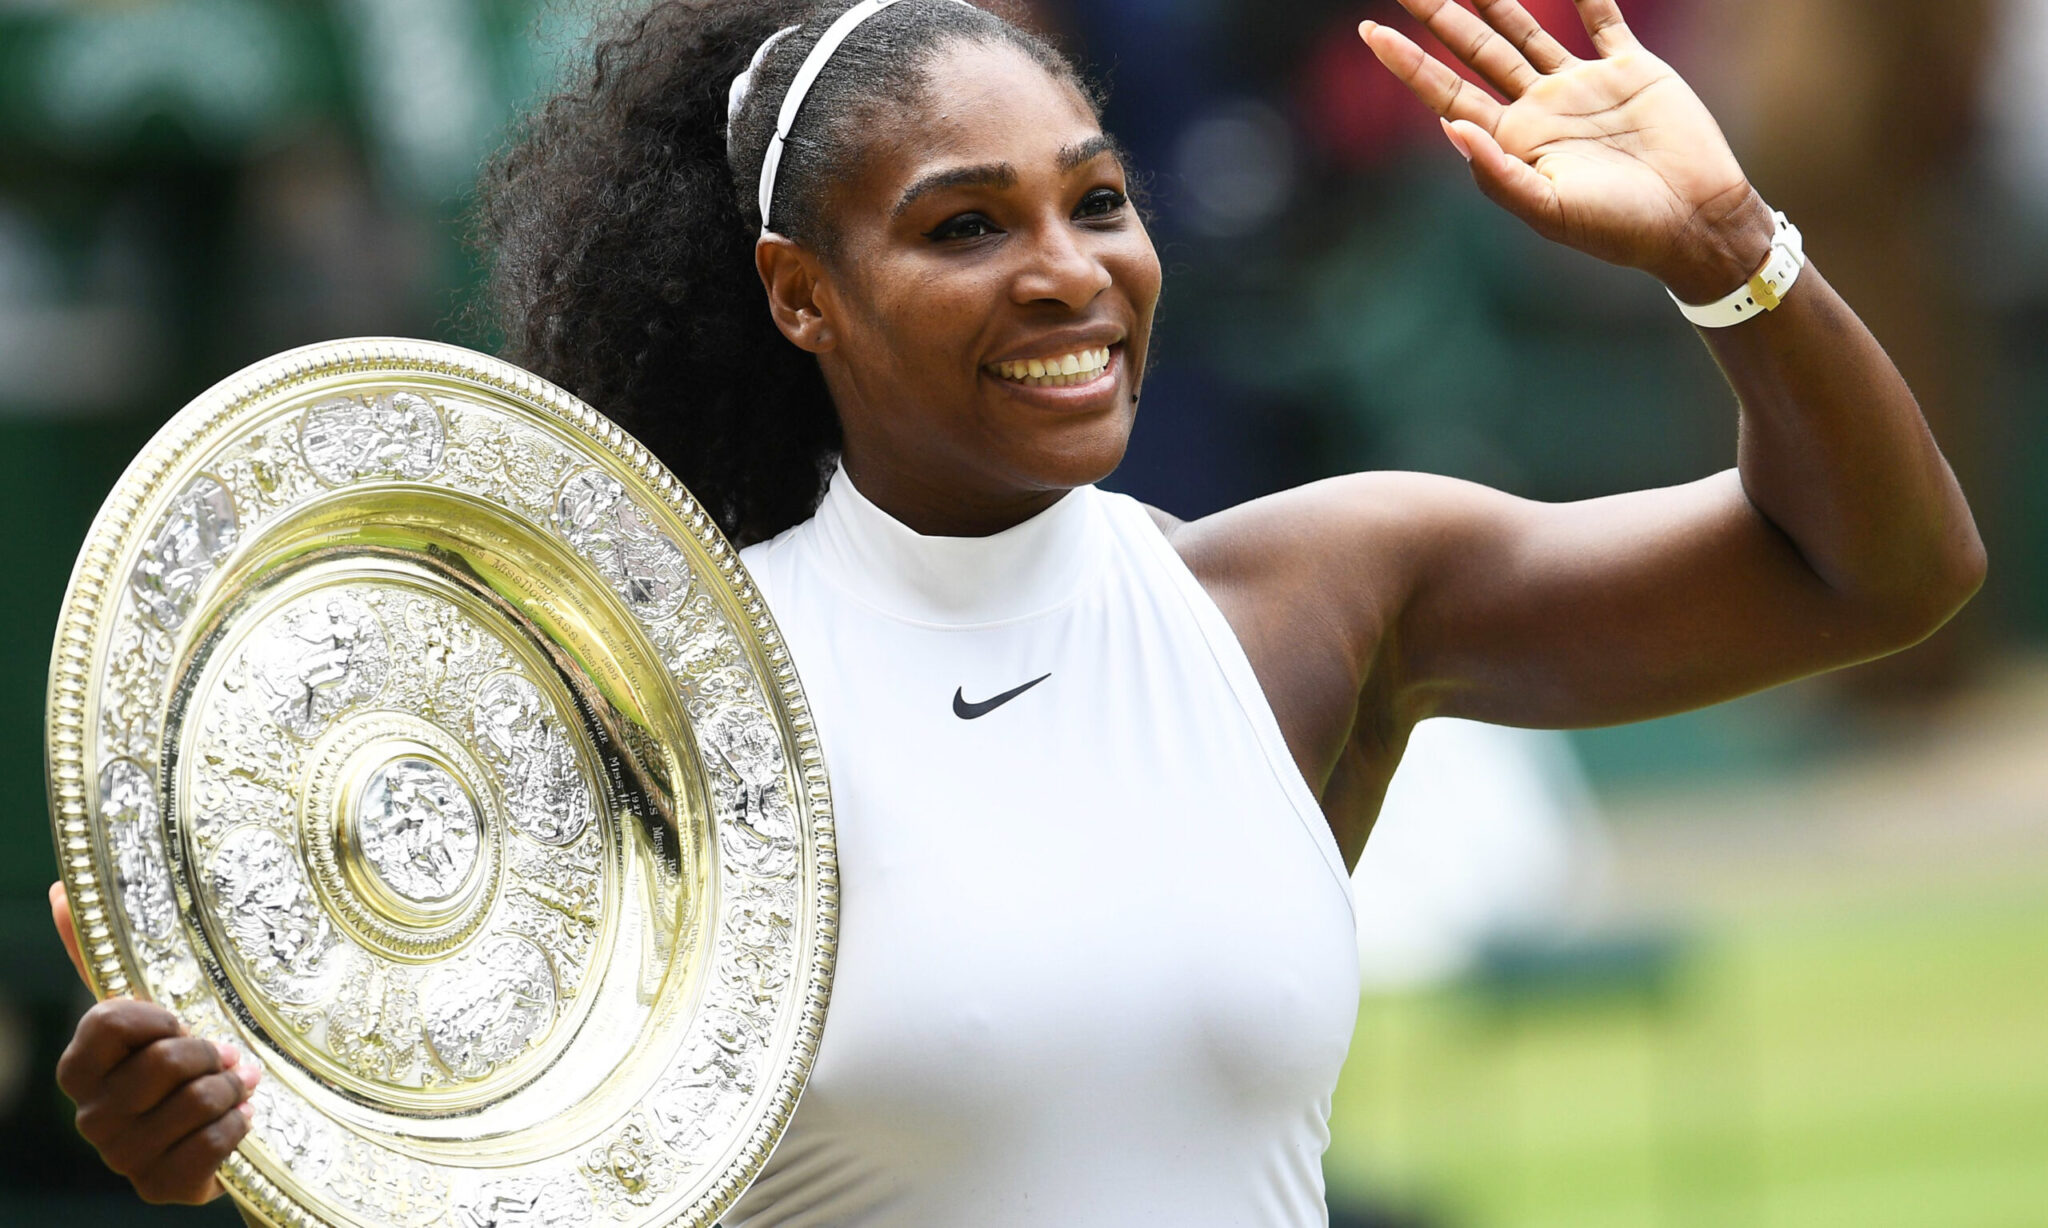 US player Serena Williams poses with the winner's trophy, the Venus Rosewater Dish, after her women's singles final victory over Germany's Angelique Kerber on the thirteenth day of the 2016 Wimbledon Championships at The All England Lawn Tennis Club in Wimbledon, southwest London, on July 9, 2016. / AFP PHOTO / GLYN KIRK / RESTRICTED TO EDITORIAL USE